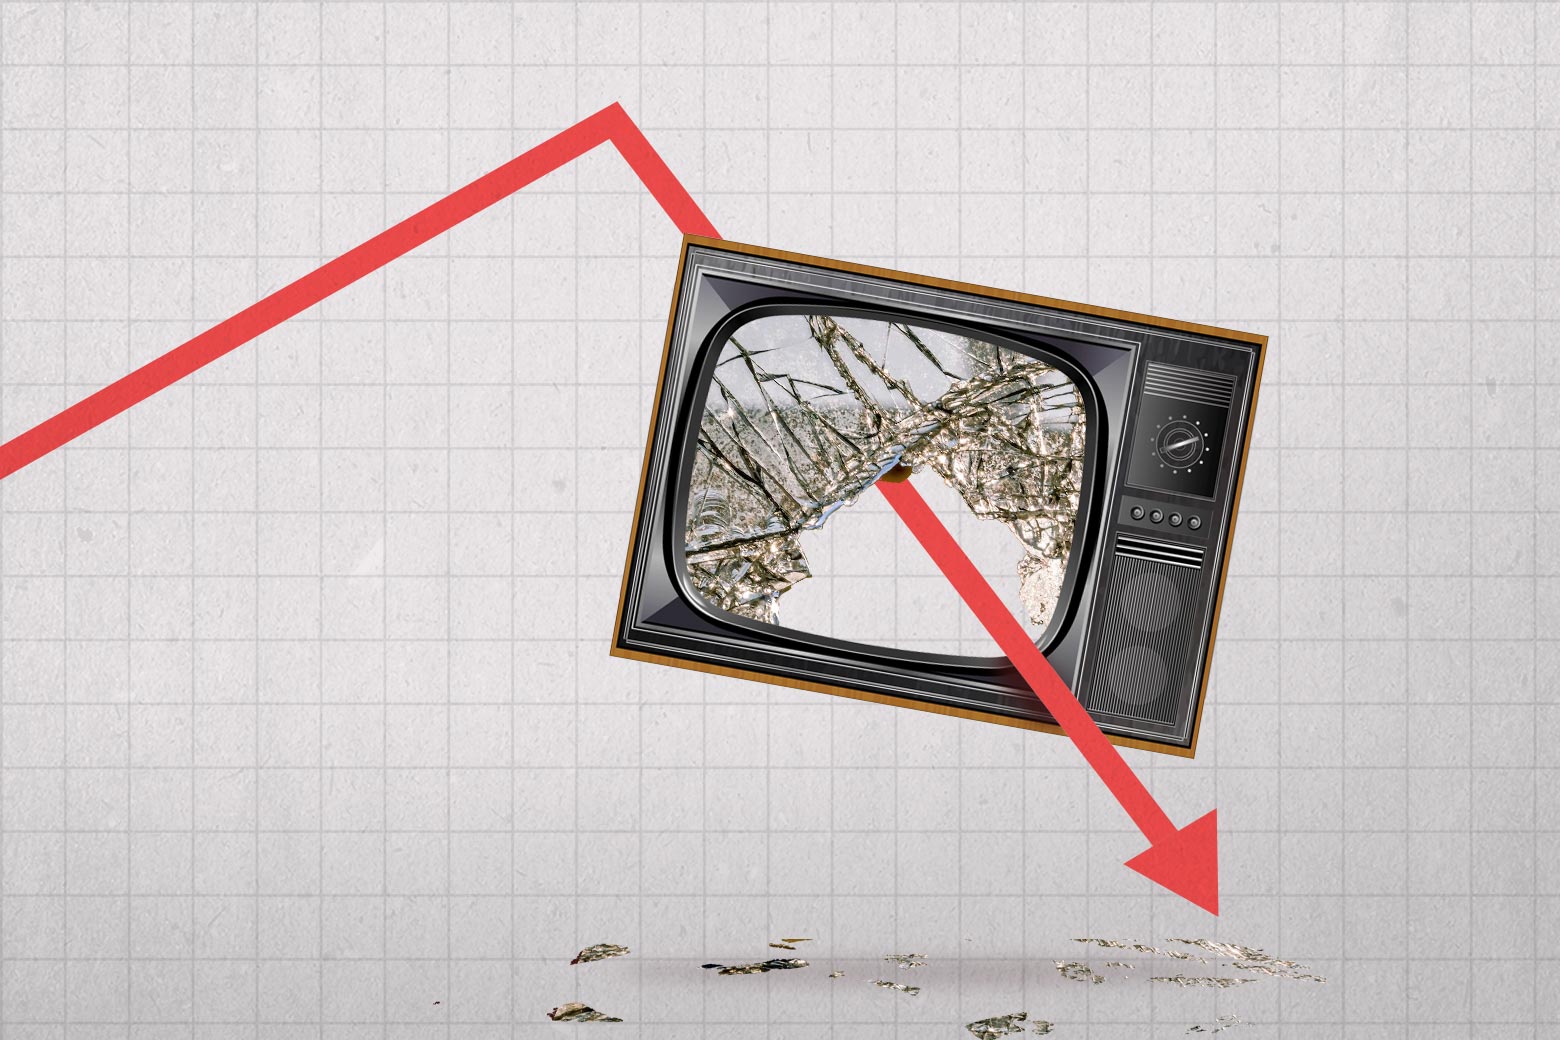 On a line graph, a red arrow reaches its peak then plummets downward, crashing through a TV screen in the process.